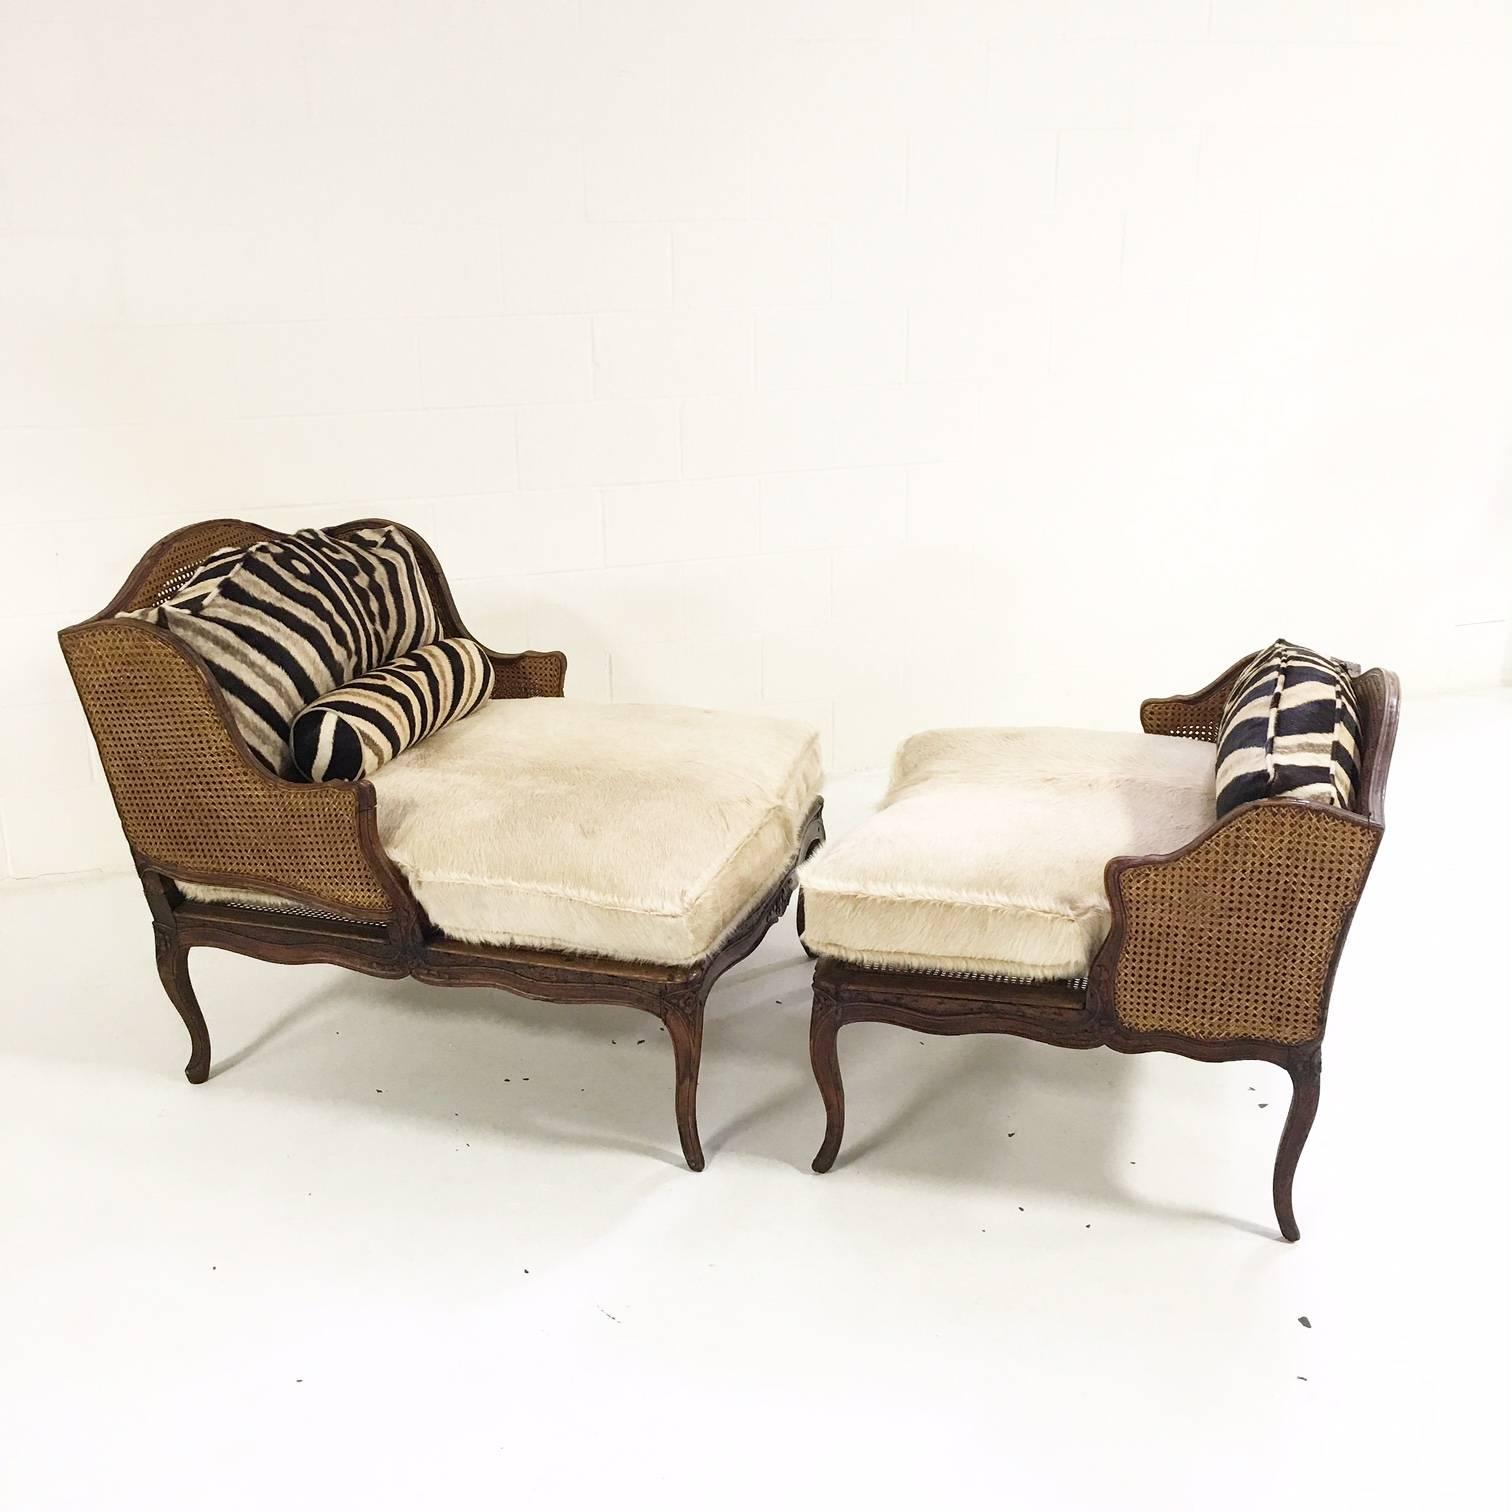 This dramatic and beautiful two-piece caned daybed looks as though it once had a home in Karen Blixen’s Kenyan farmhouse. We handcrafted custom cowhide and zebra hide cushions and pillows. We hand selected the perfect hides for the custom zebra and